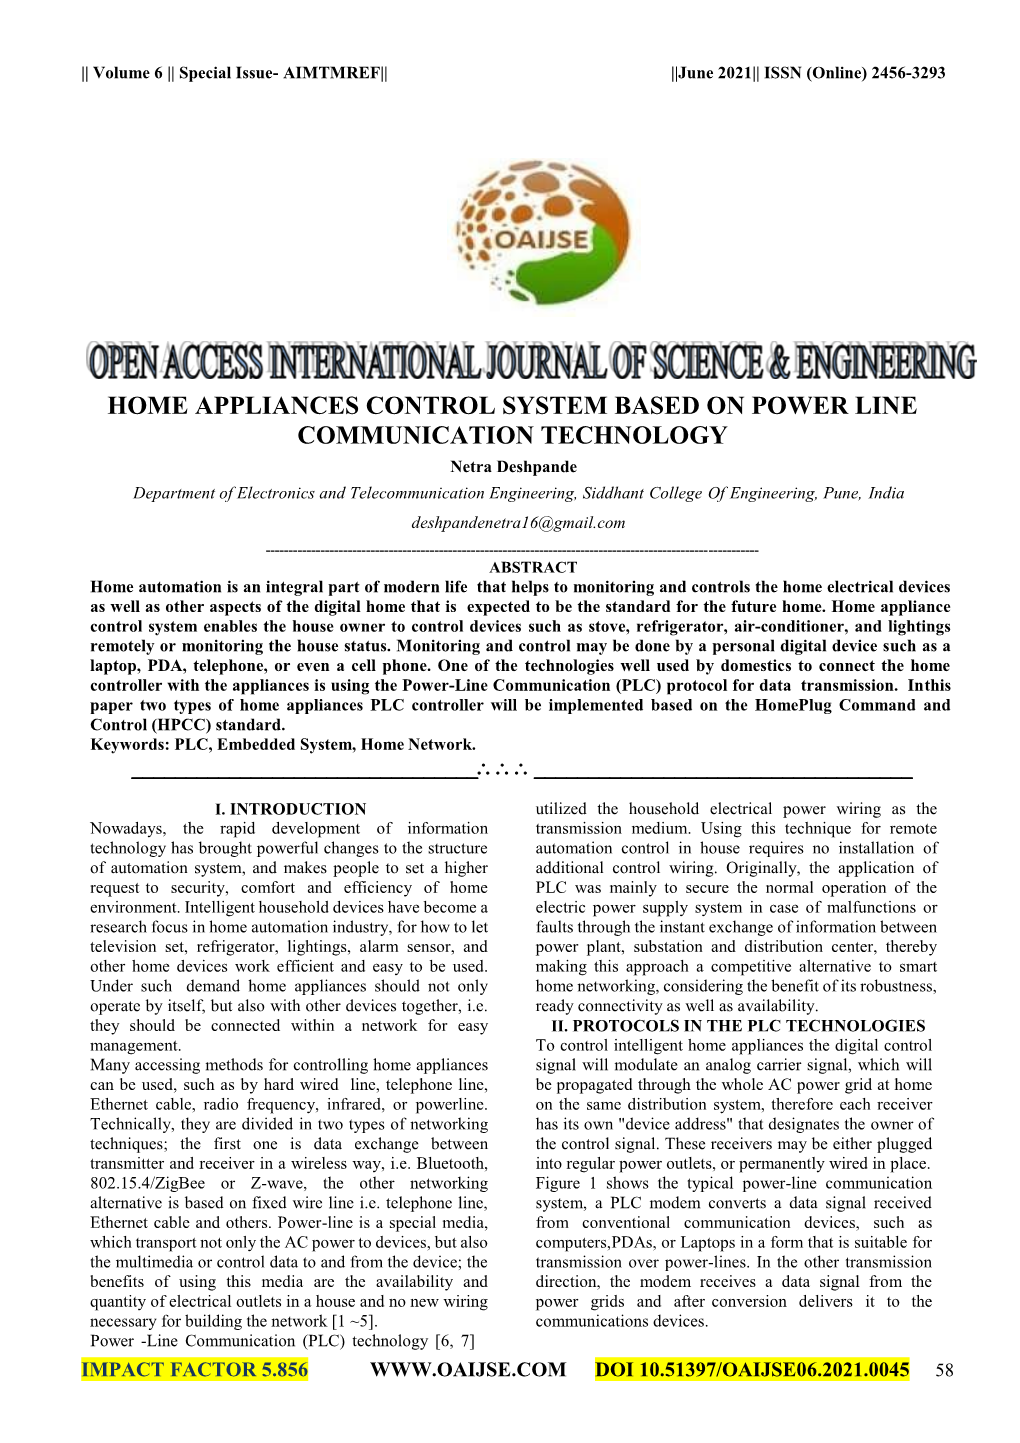 Home Appliances Control System Based on Power Line